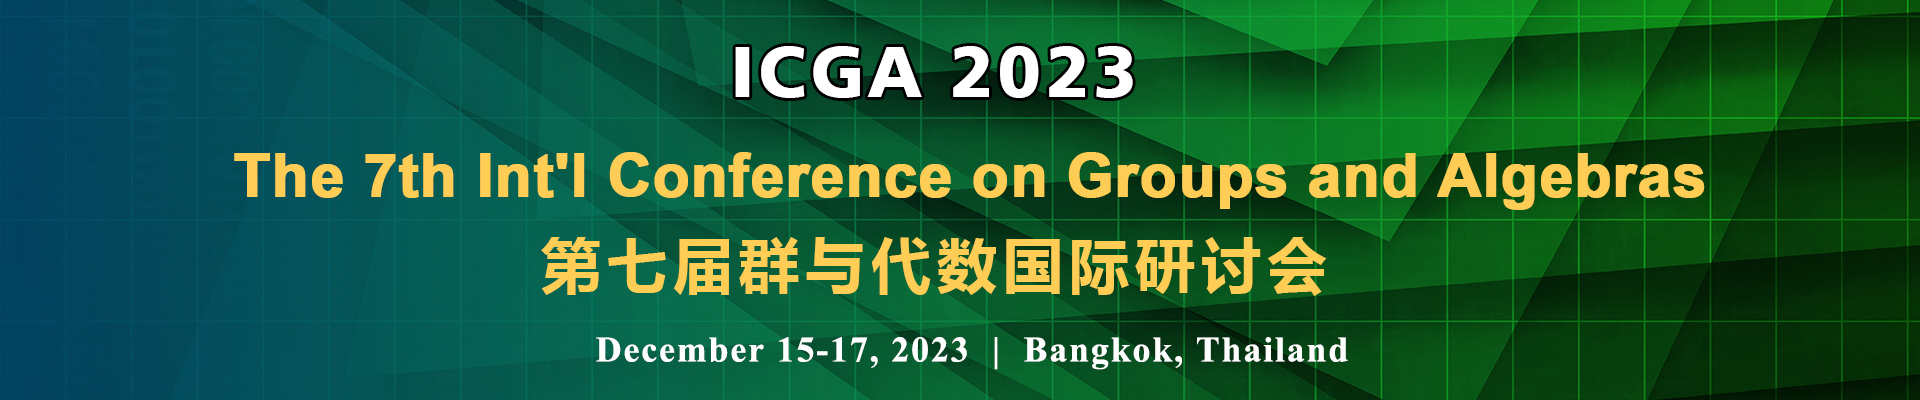 The 7th Int’l Conference on Groups and Algebras (ICGA 2023)